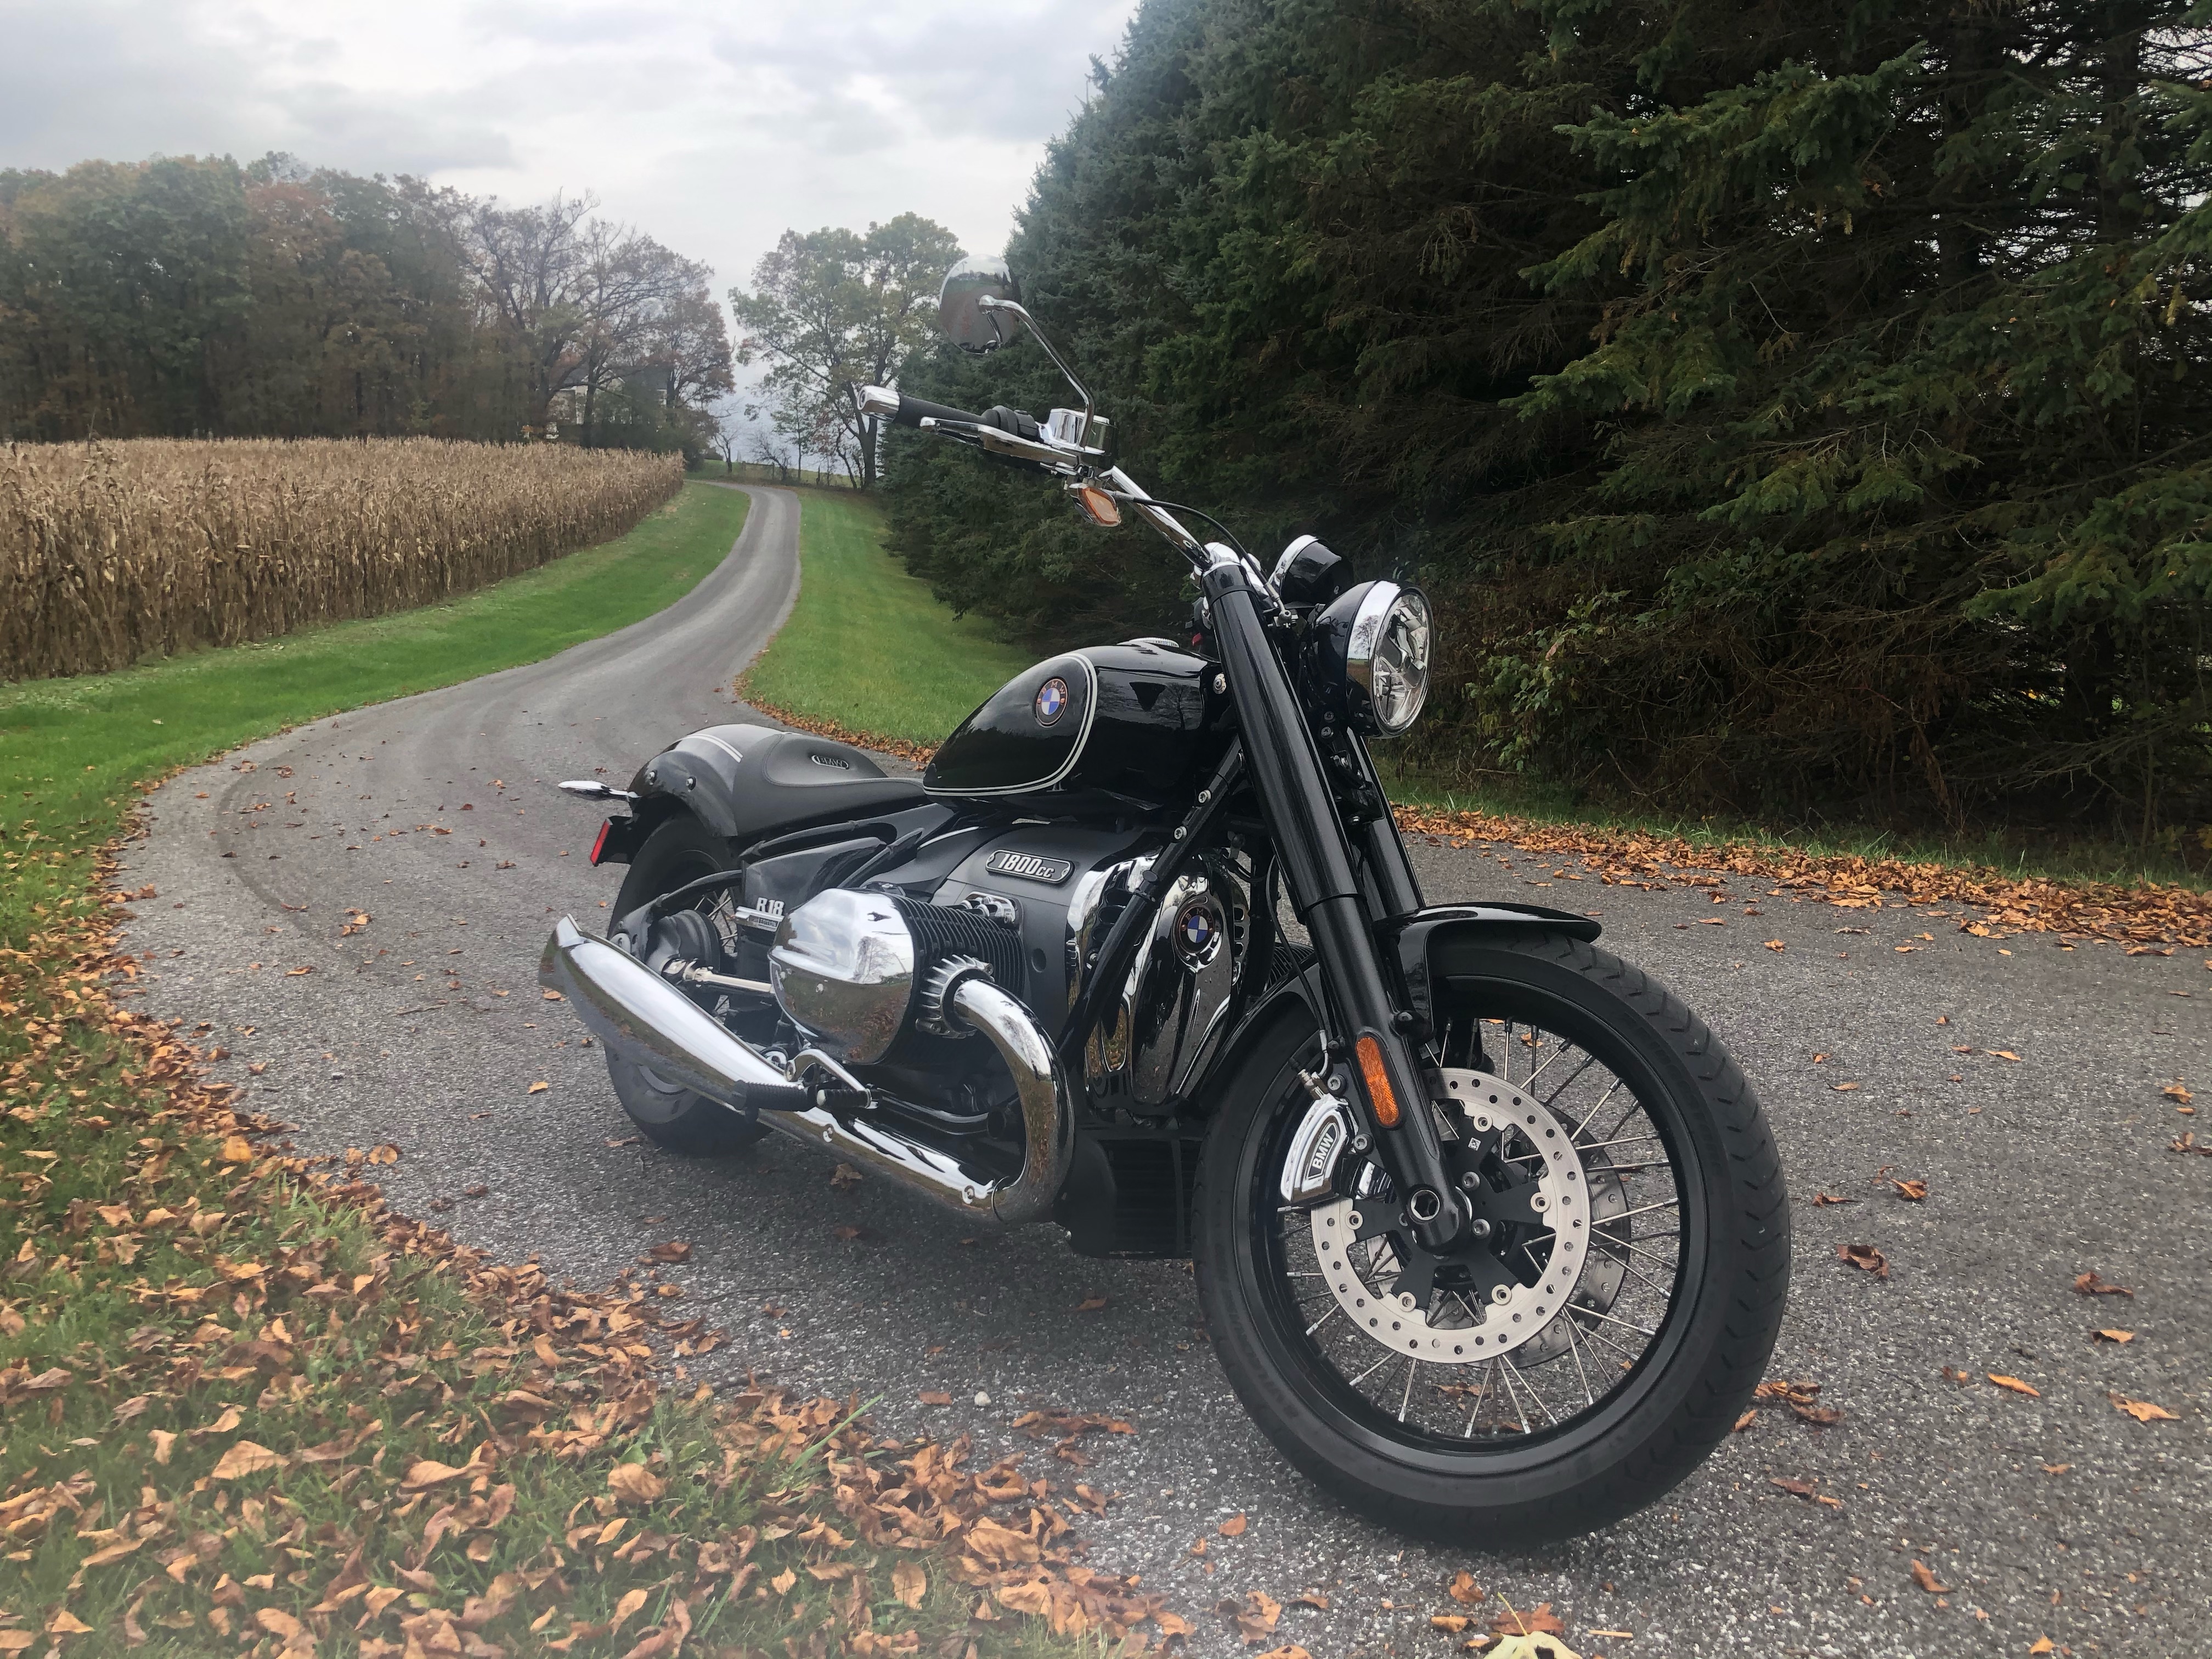 Autumn Ride on country roads